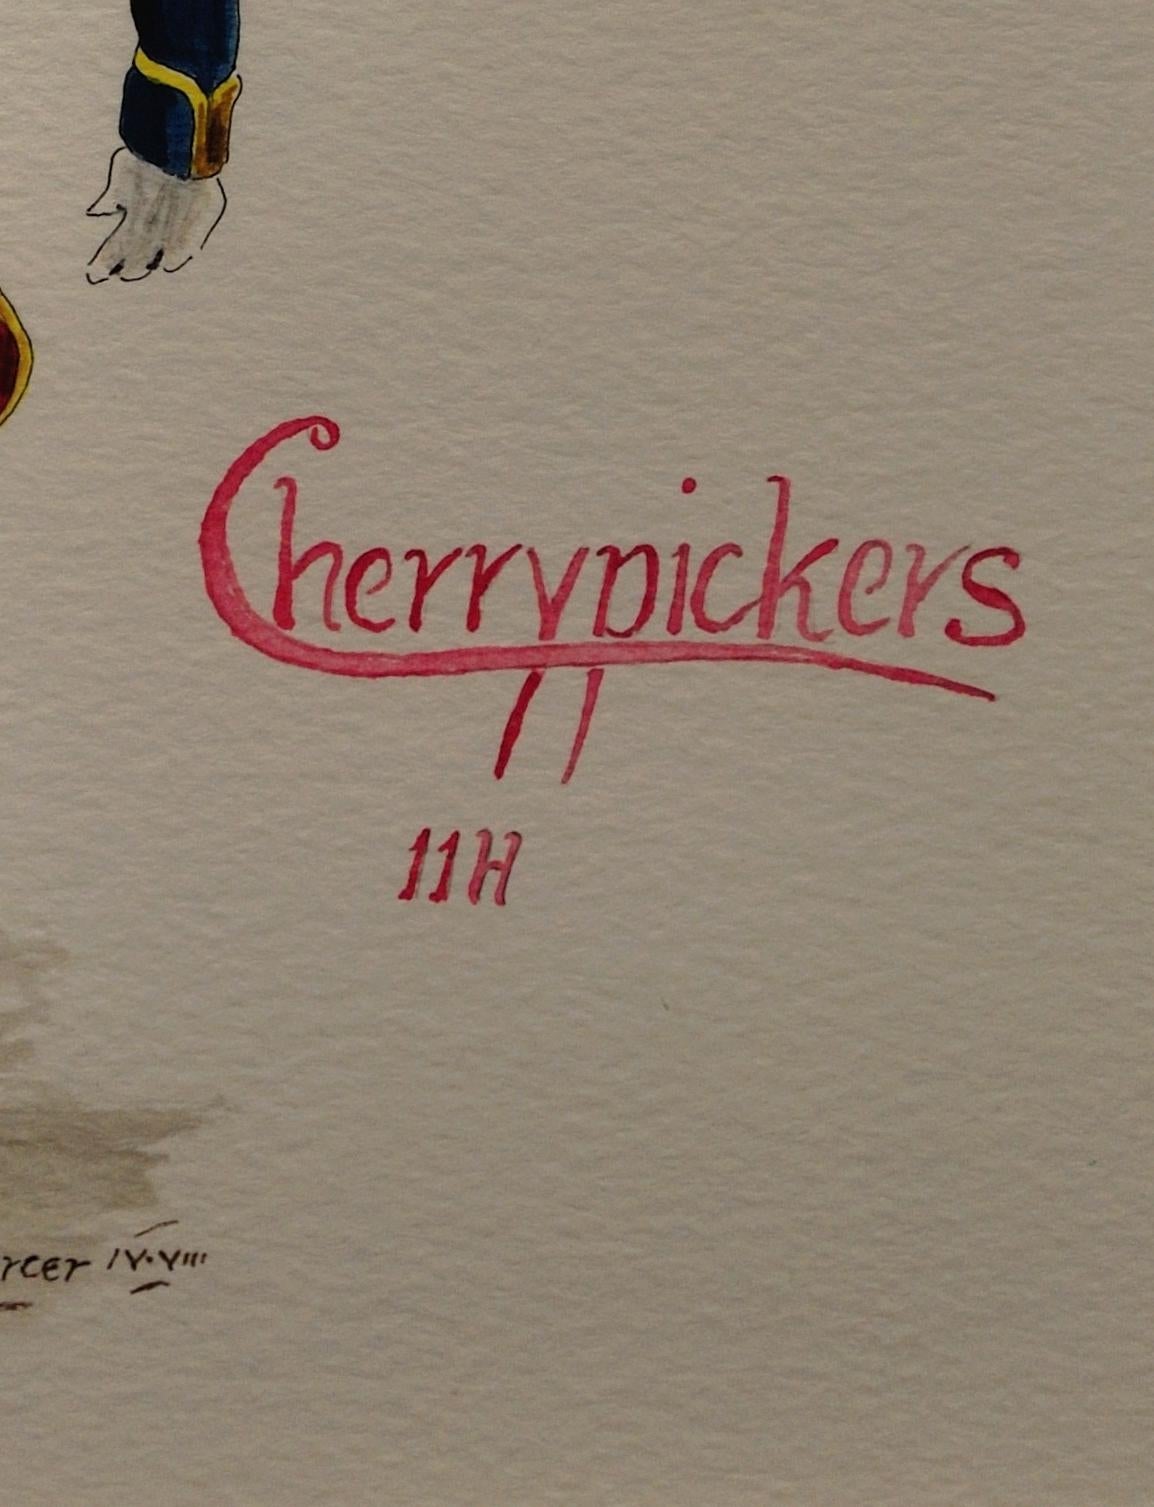 Cherrypickers – 11th Hussars. By former Conservative MP and Hussar Officer. 3